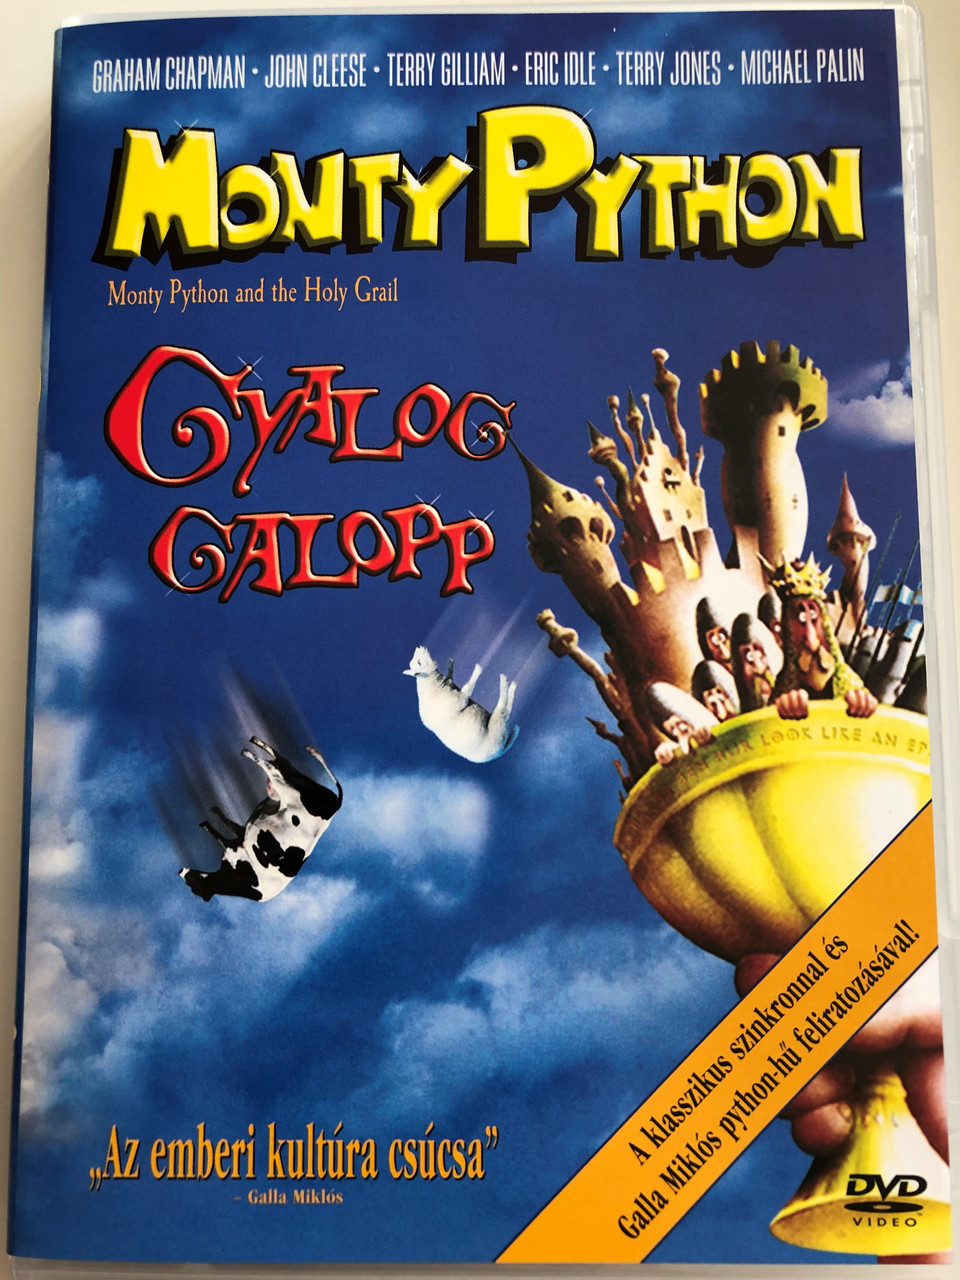 Monty Python and the Holy Grail DVD Monty Python Gyalog Galopp / Directed  by Terry Gilliam, Terry